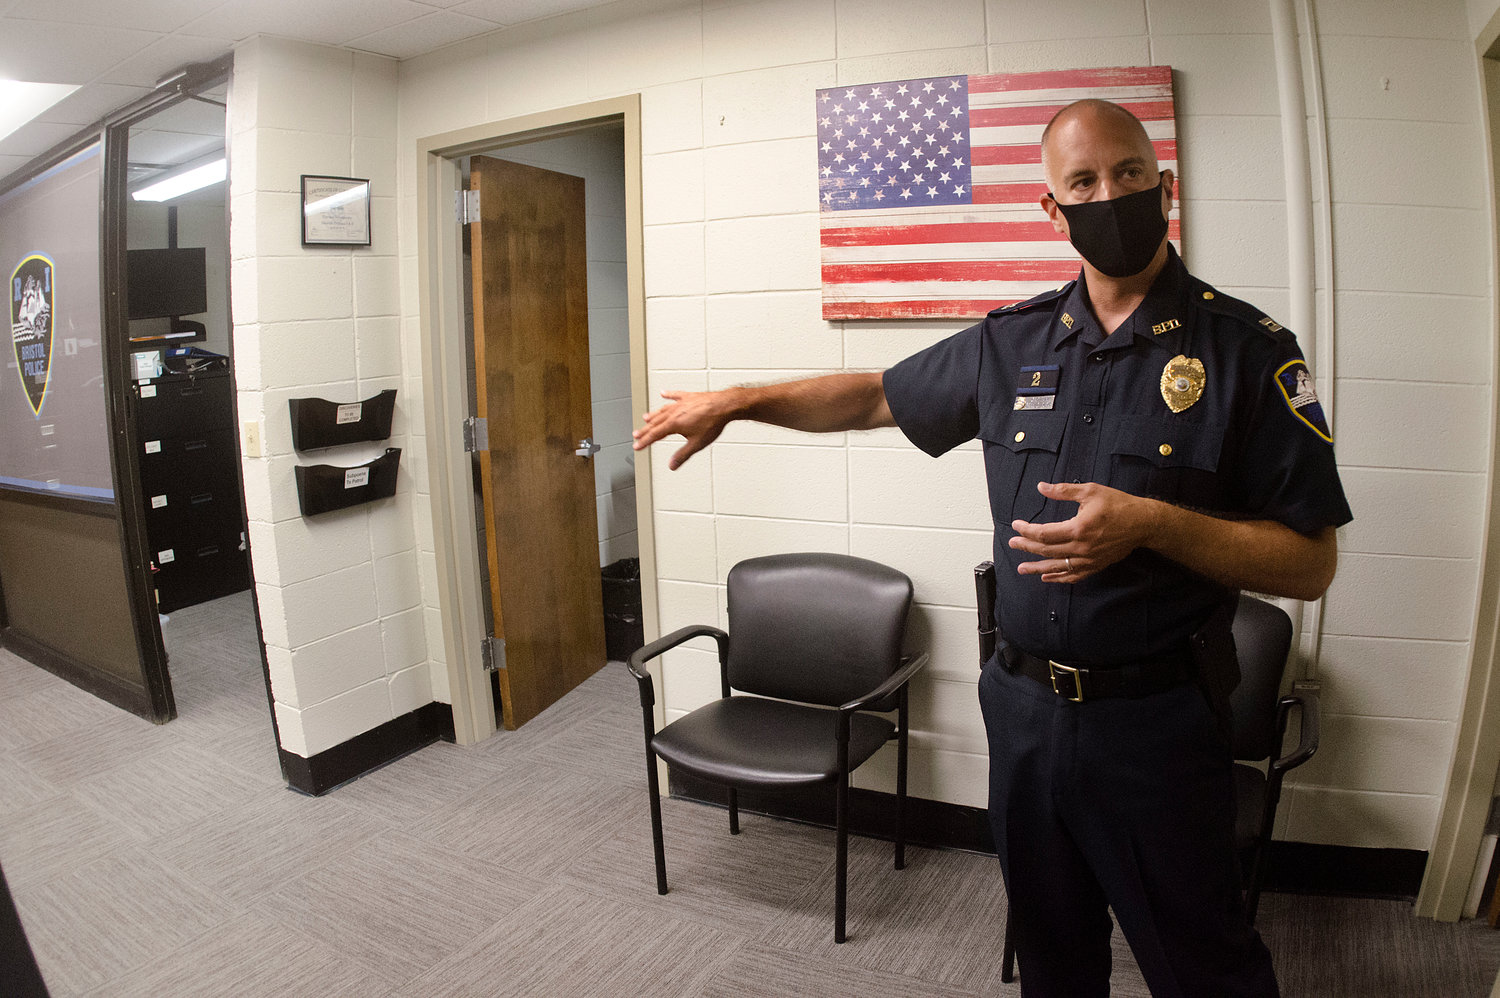 Capt. Brian Burke shows some of the building improvements, including new carpeting, all done in-house by officers.